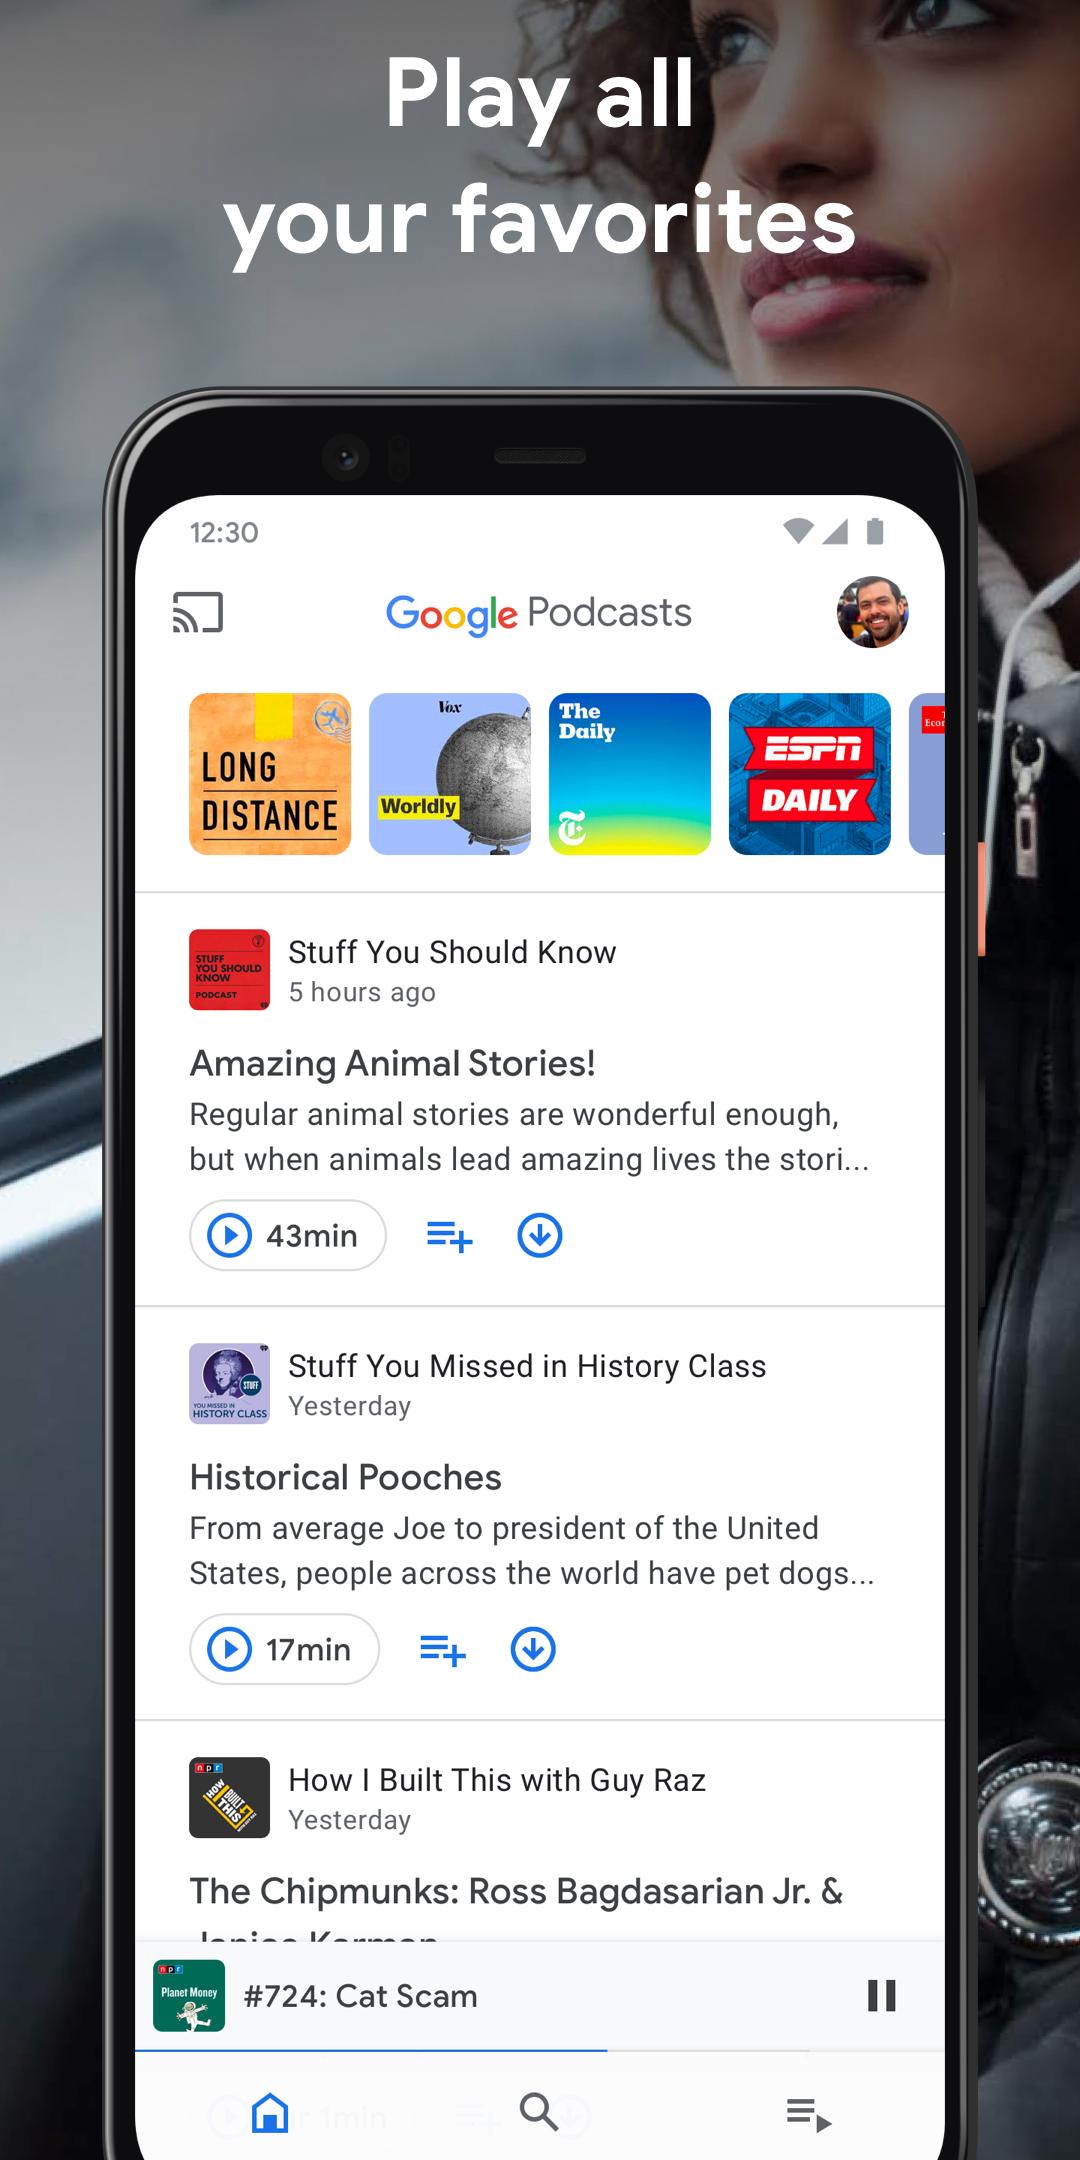 Google Podcasts Discover free & trending podcasts 1.0.0.301897054 Screenshot 1